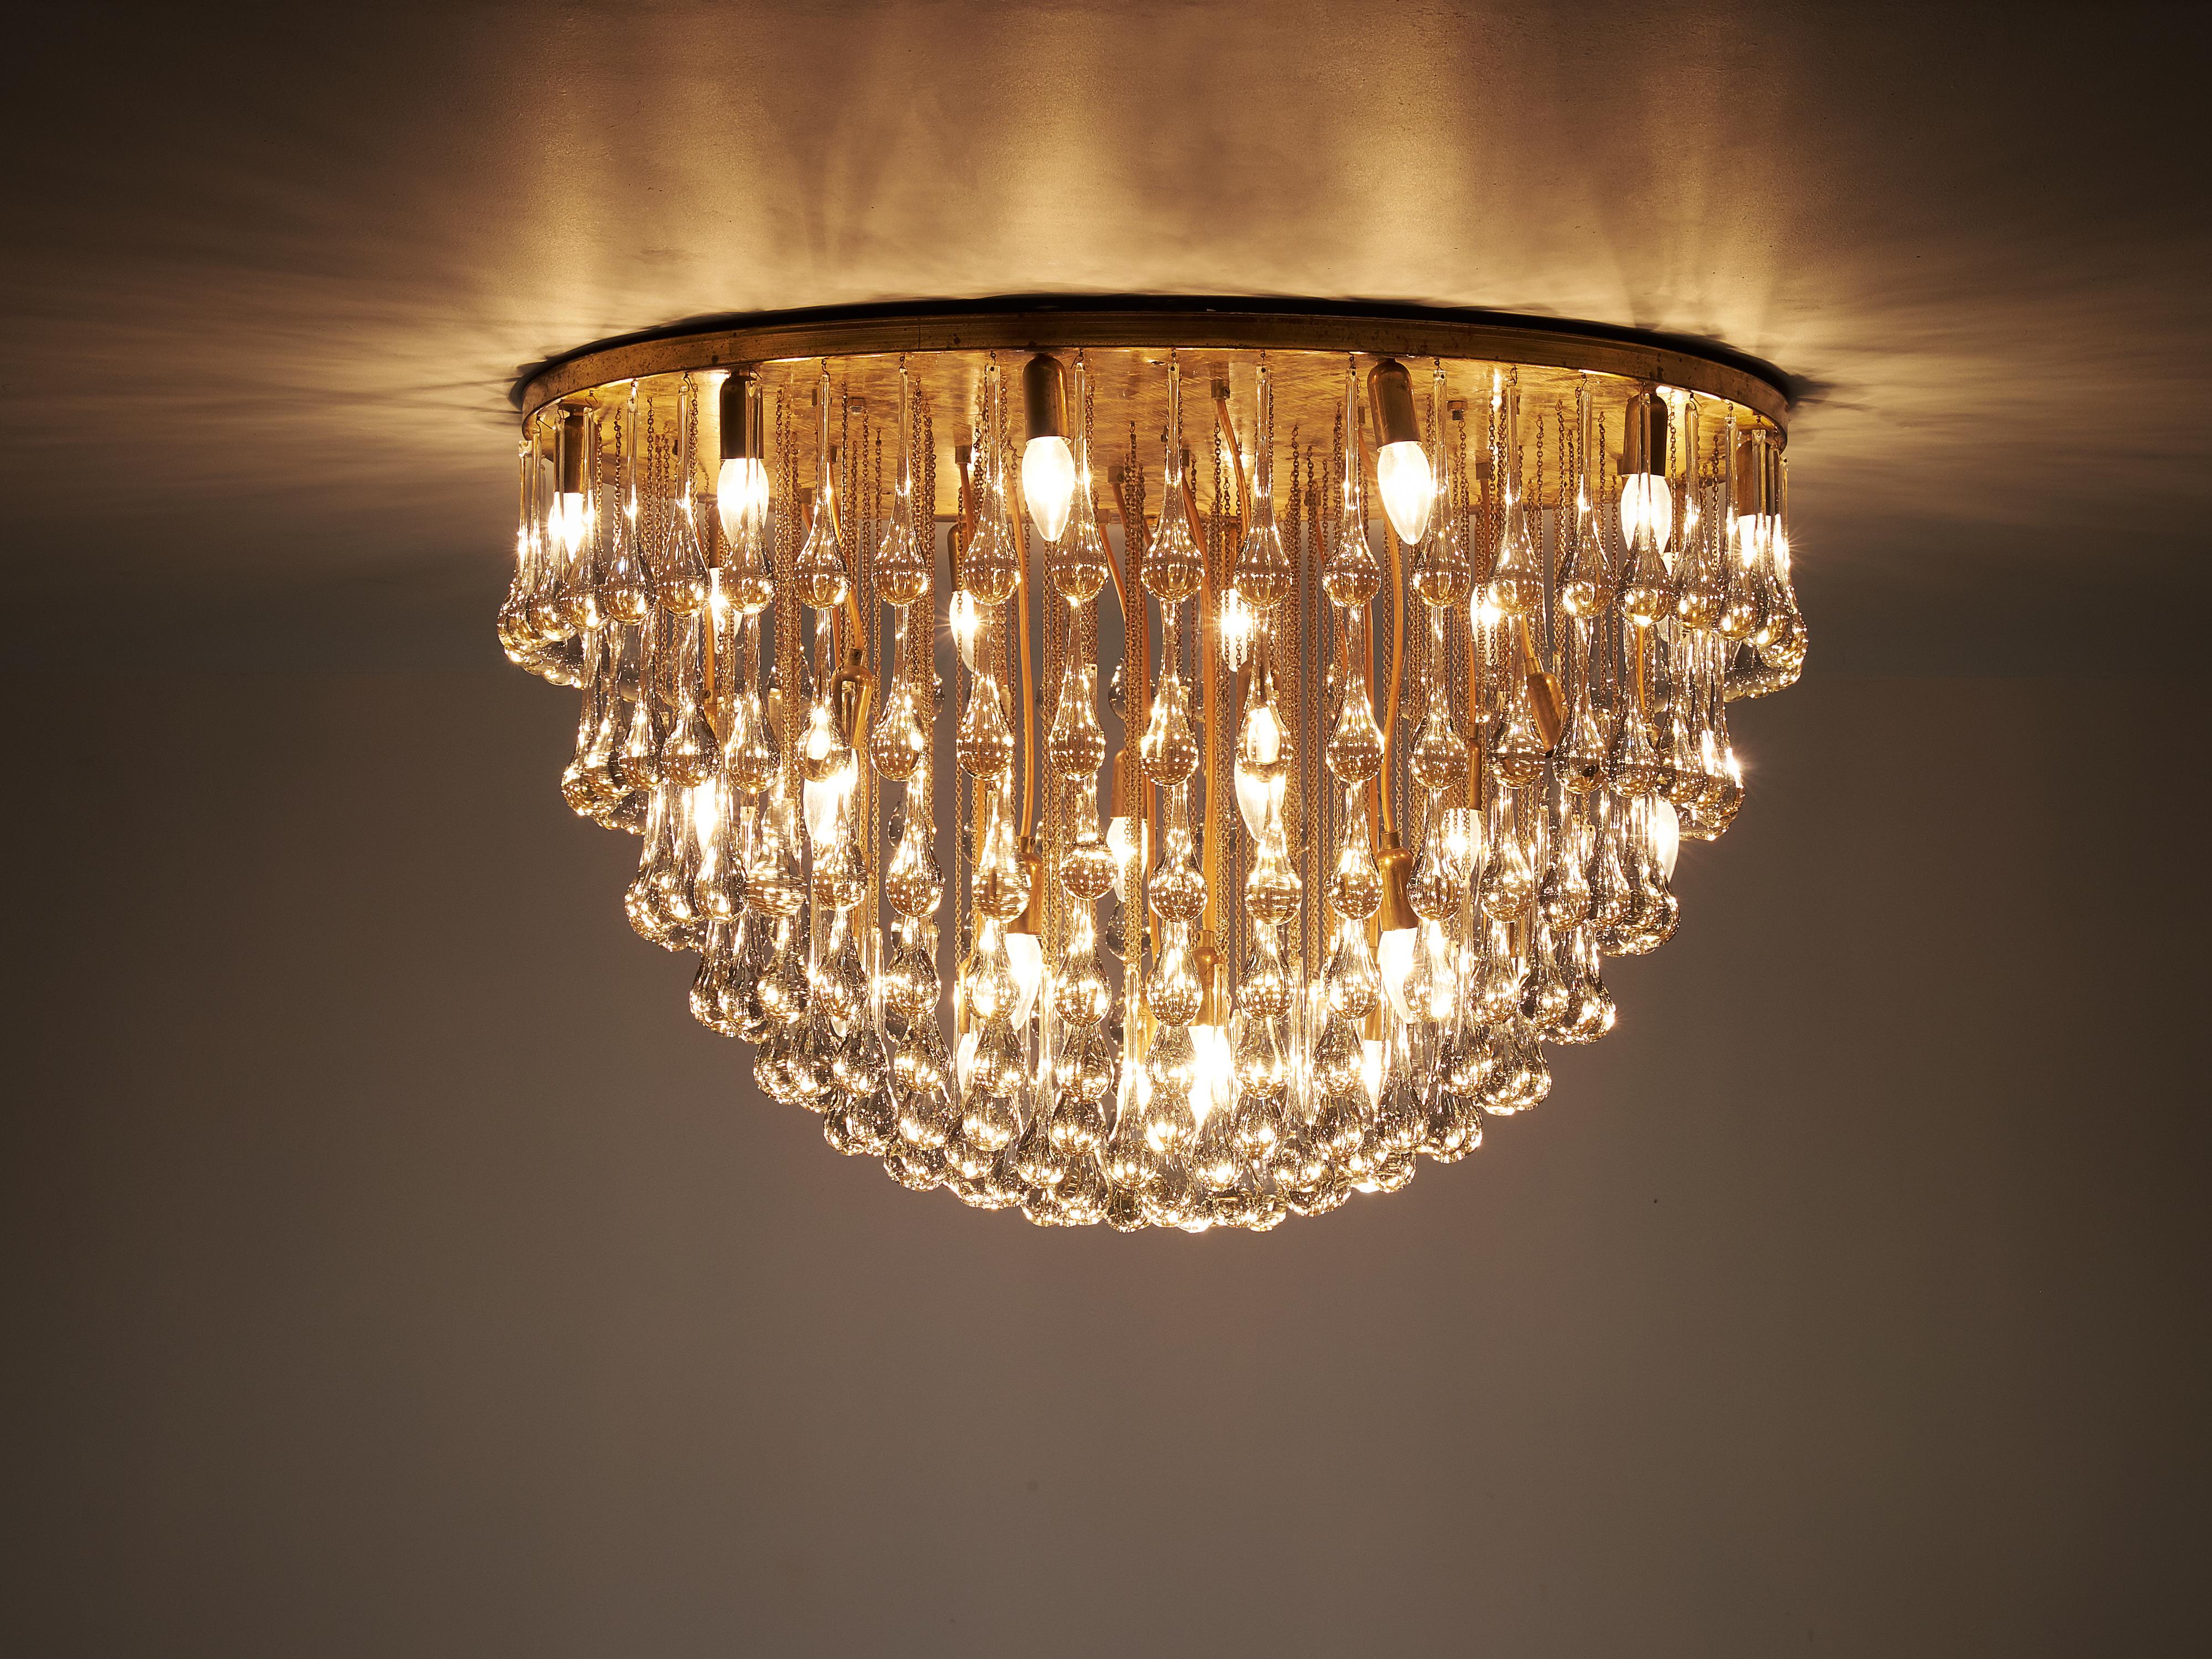 Mid-20th Century Large Italian Chandelier in Brass with Glass Drops